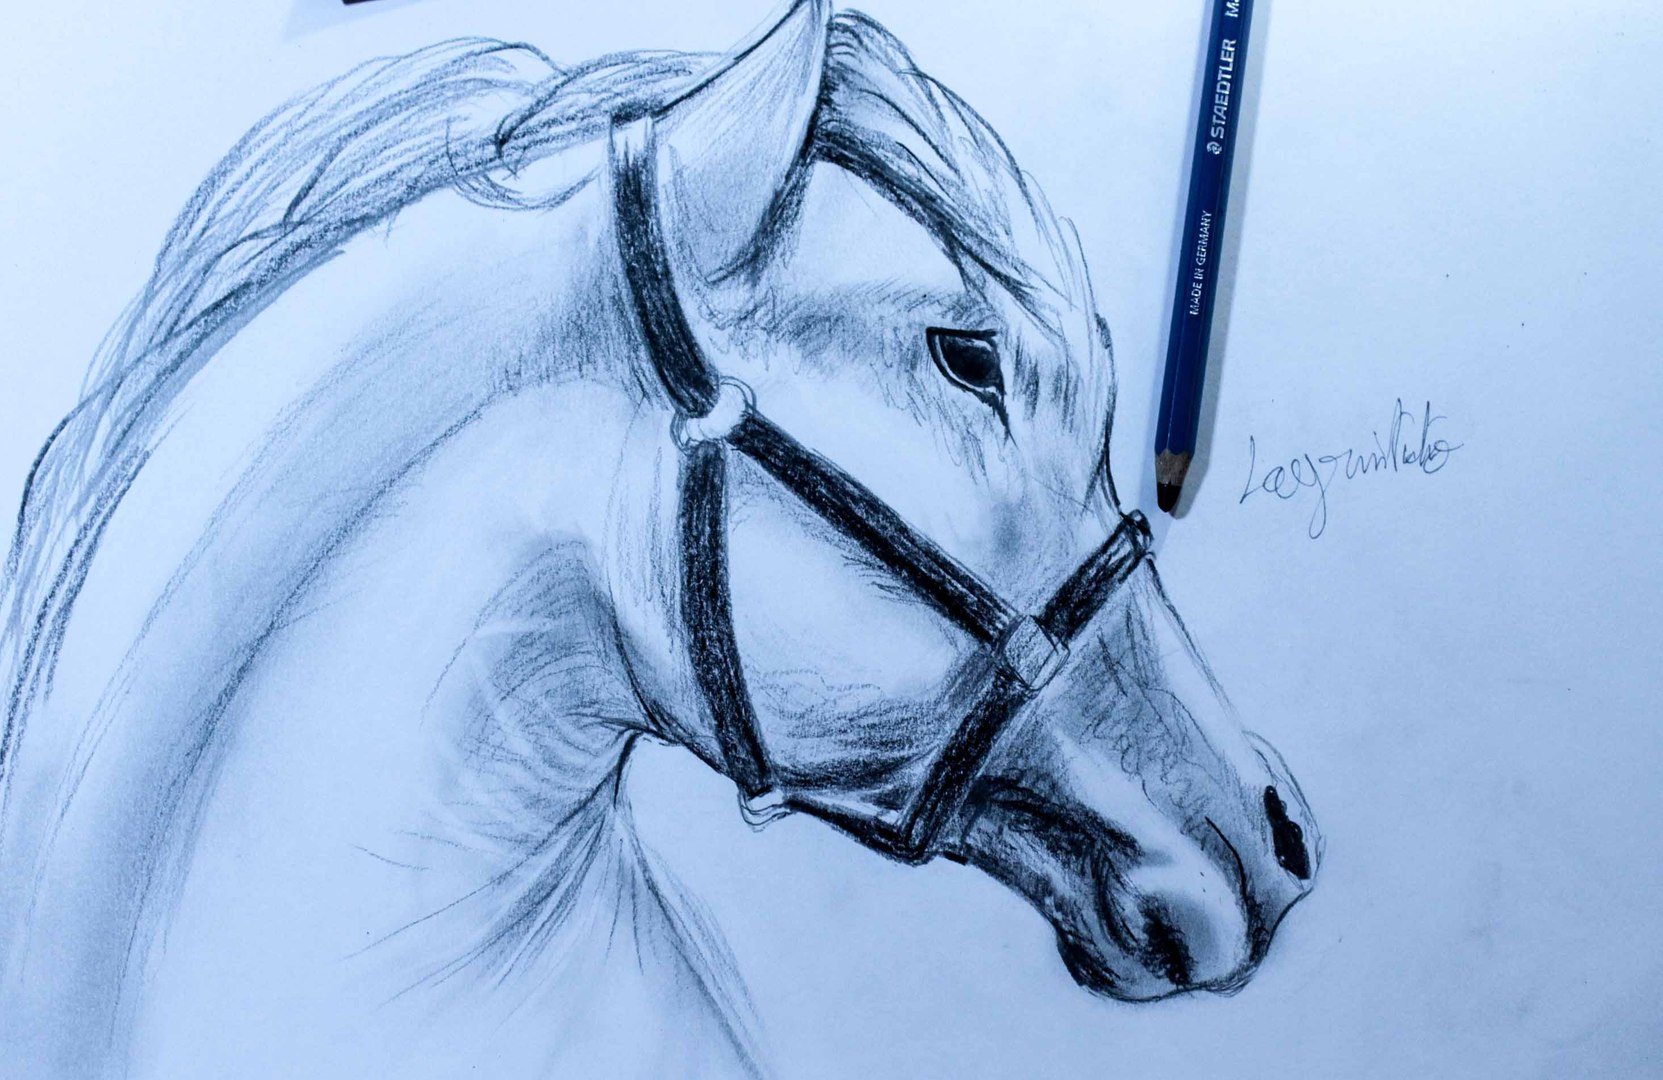 How to draw a Horse تعلم رسم حصان بقلم الرصاص - Vidéo Dailymotion